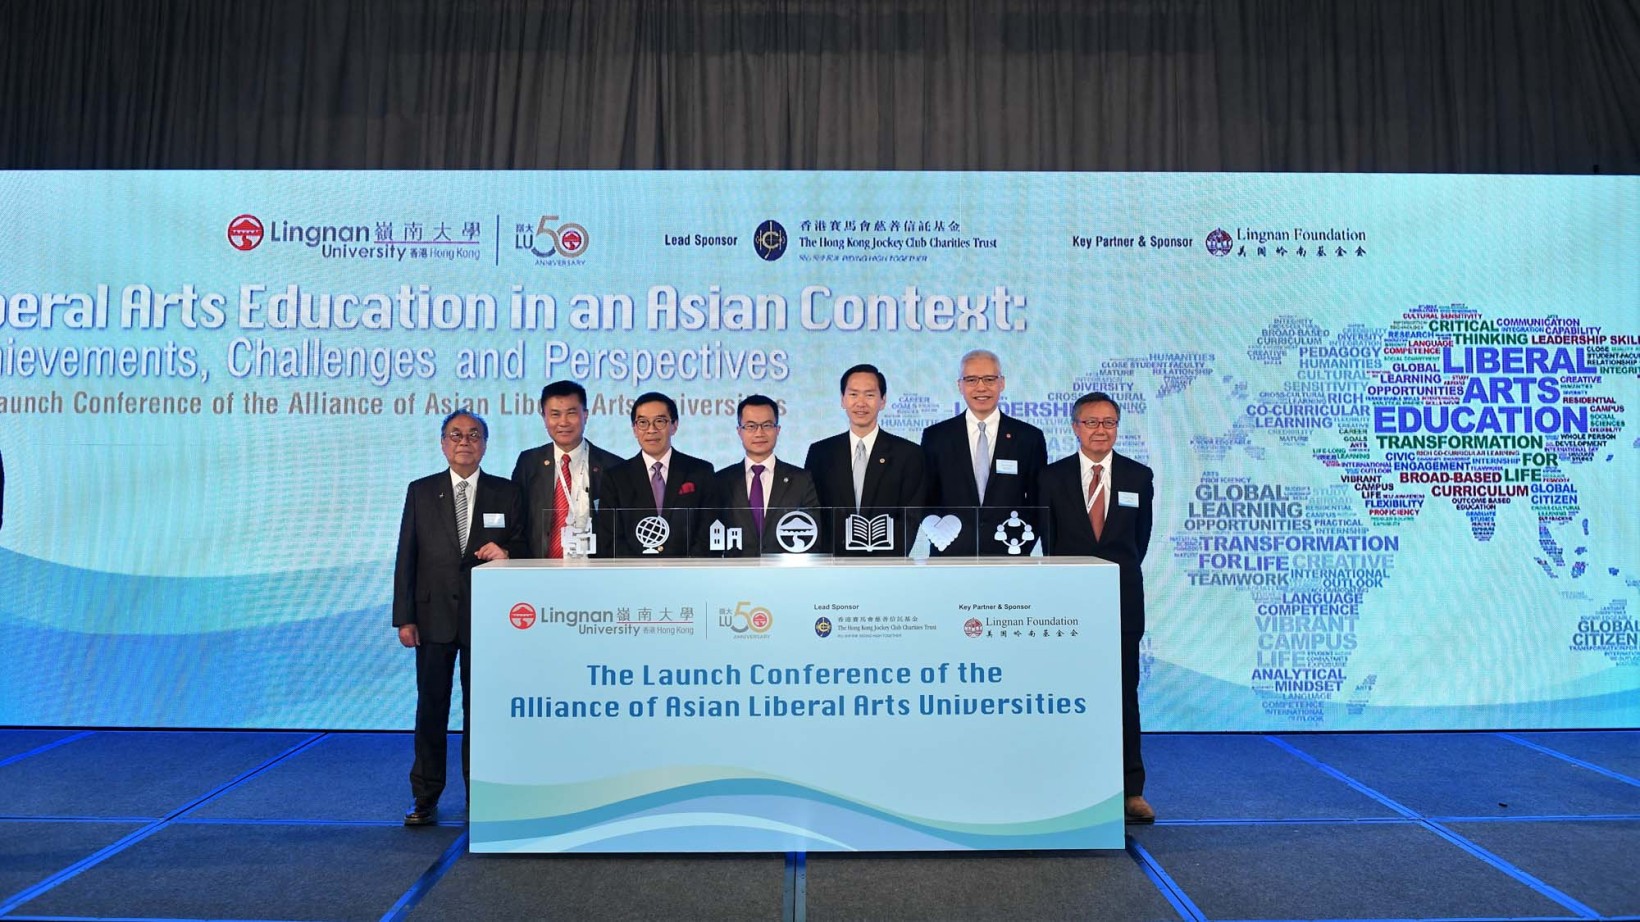 Lingnan University organises Conference to mark the launch of the Alliance of Asian Liberal Arts Universities